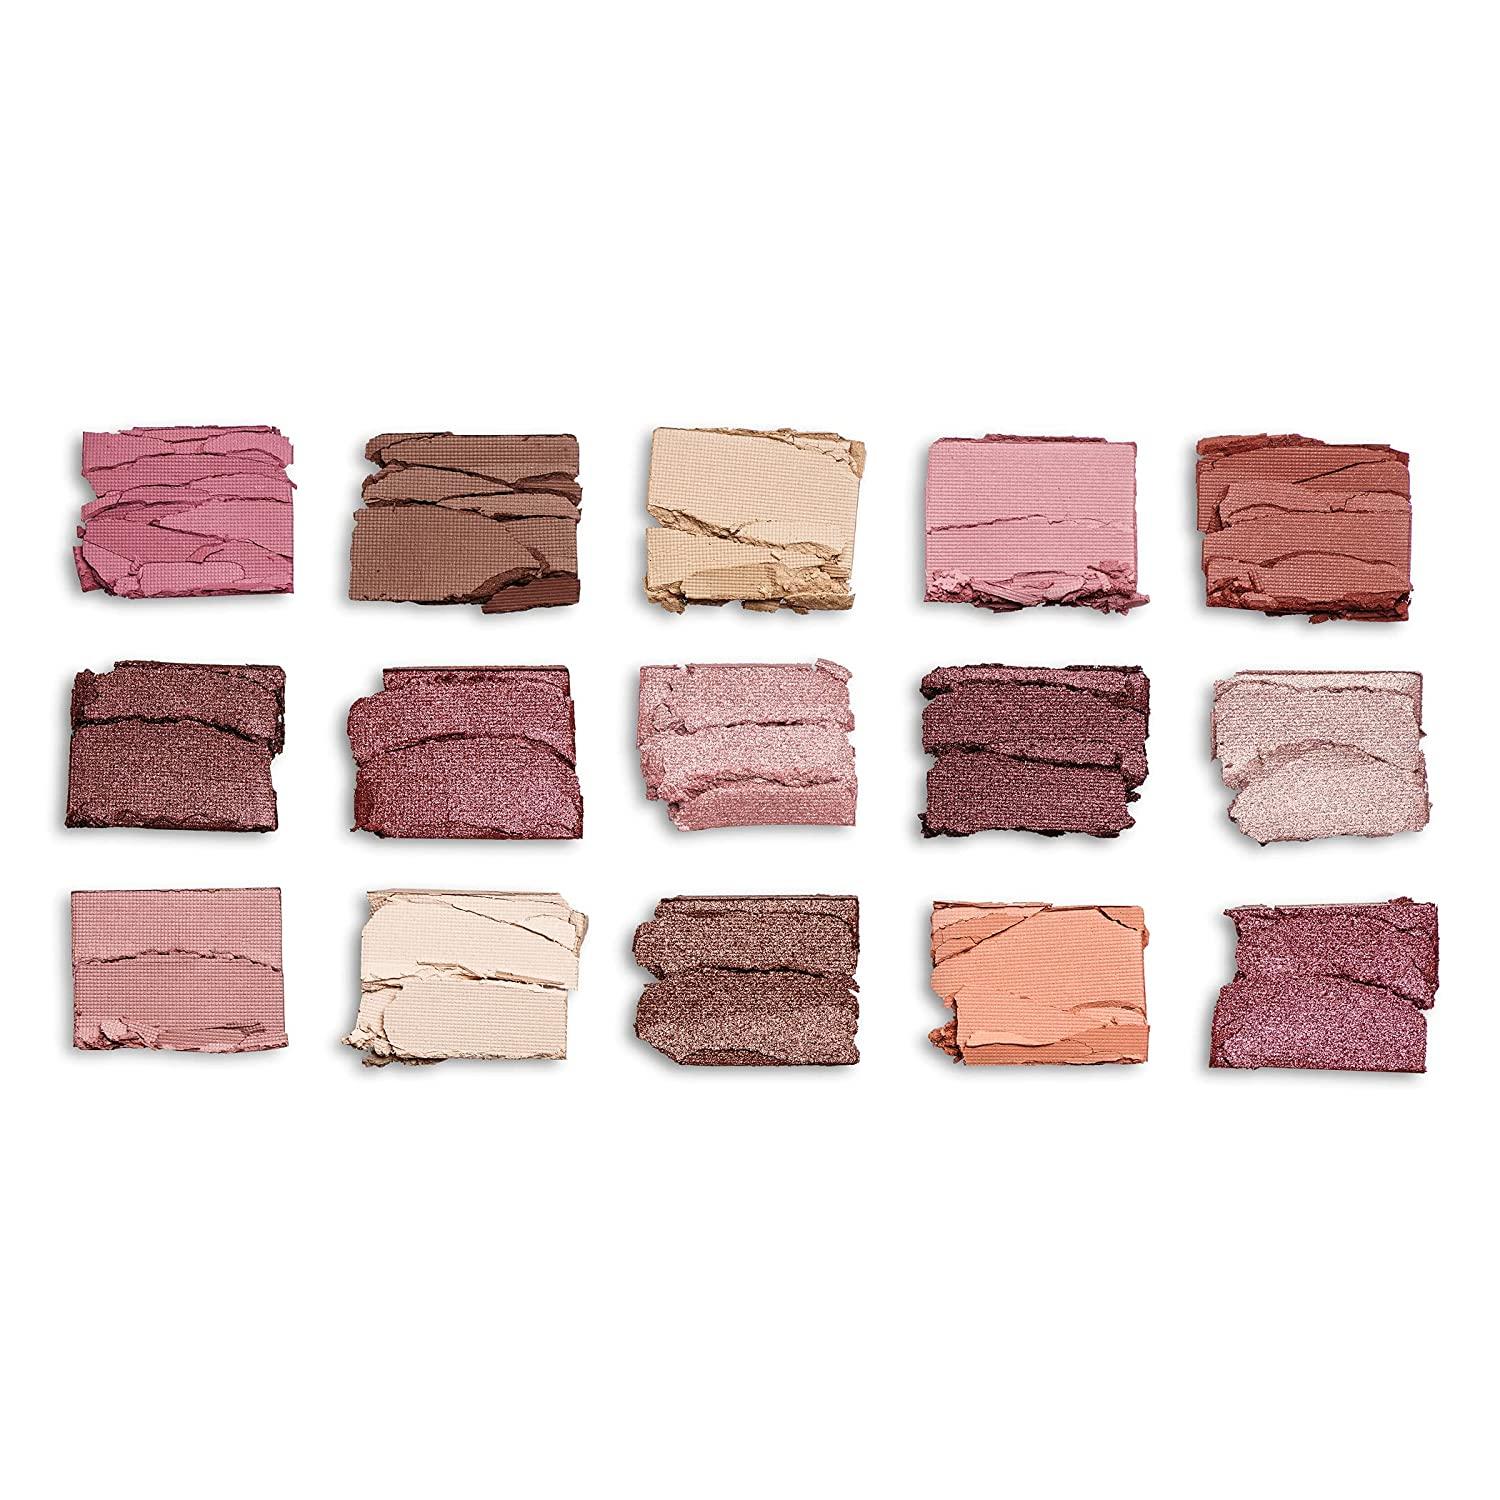  Makeup Revolution Reloaded Palette, Makeup Eyeshadow Palette,  Includes 15 Shades, Lasts All Day Long, Vegan & Cruelty Free, Affection,  16.5g : Beauty & Personal Care